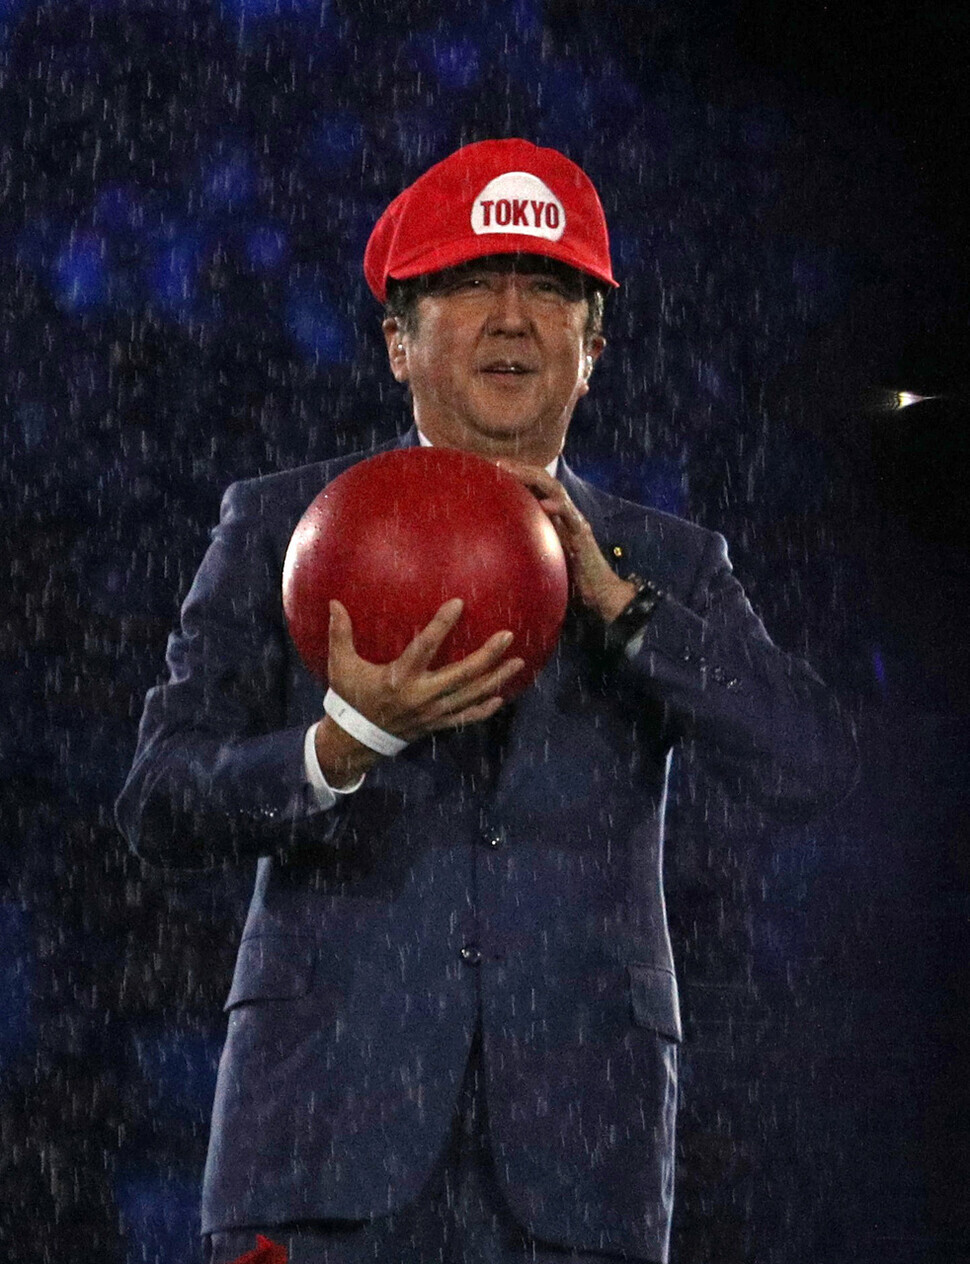 Then-Japanese Prime Minister Shinzo Abe appears as Super Mario during the Olympic Games closing ceremony in Rio de Janeiro on Aug. 21, 2016. (Reuters/Yonhap News)